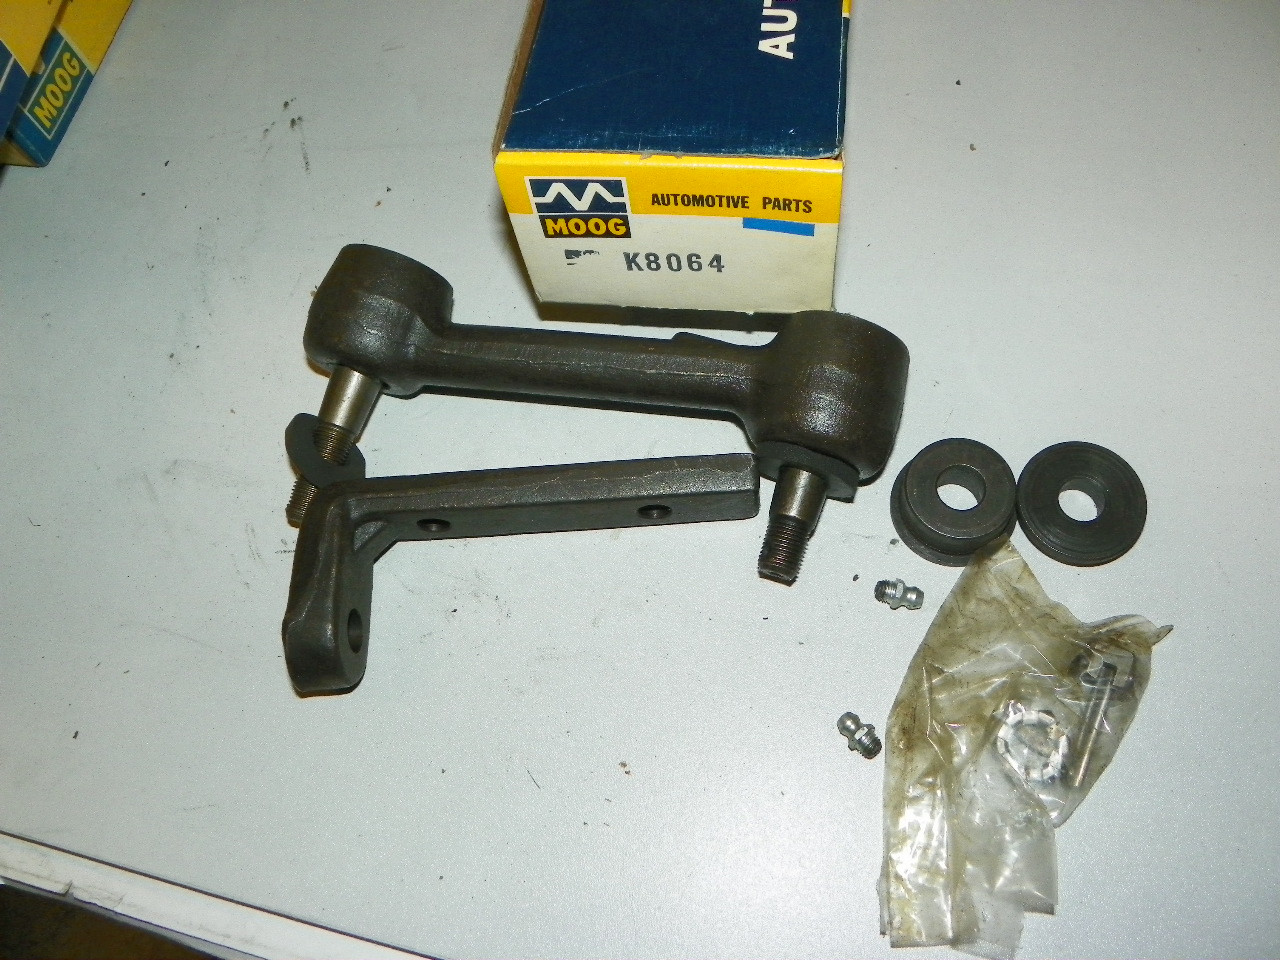 Ford Mercury 1961-62 NOS High Perf Idler Arm with Bracket Moog K-8064 Made in US